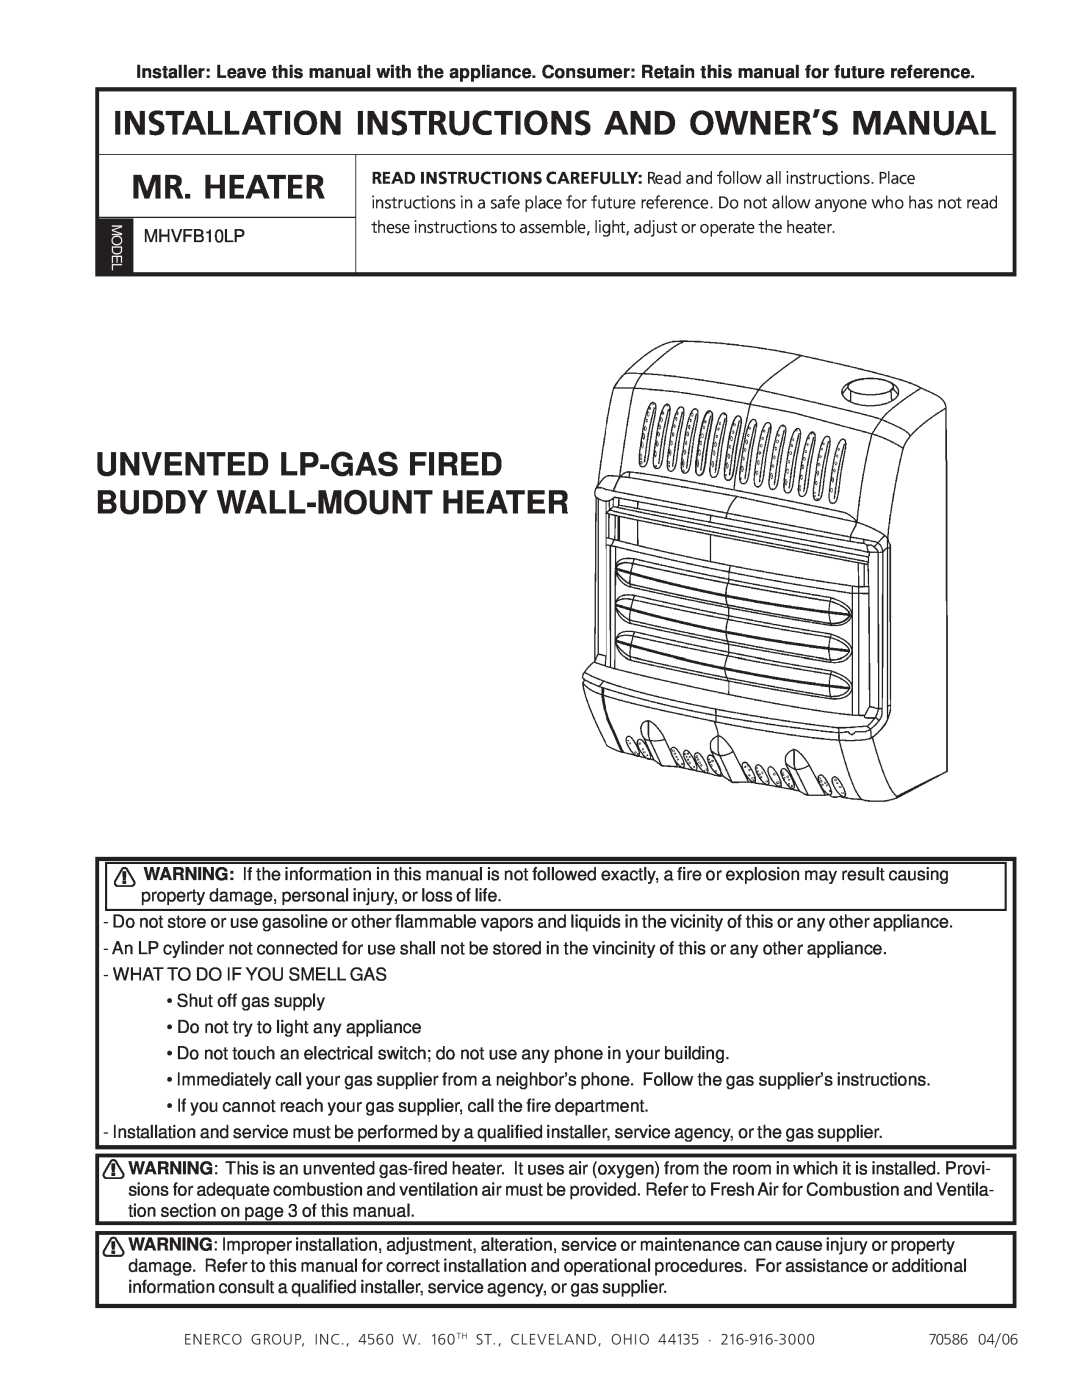 Enerco MHVFB10LP installation instructions Unvented Lp-Gasfired Buddy Wall-Mountheater, Mr. Heater 